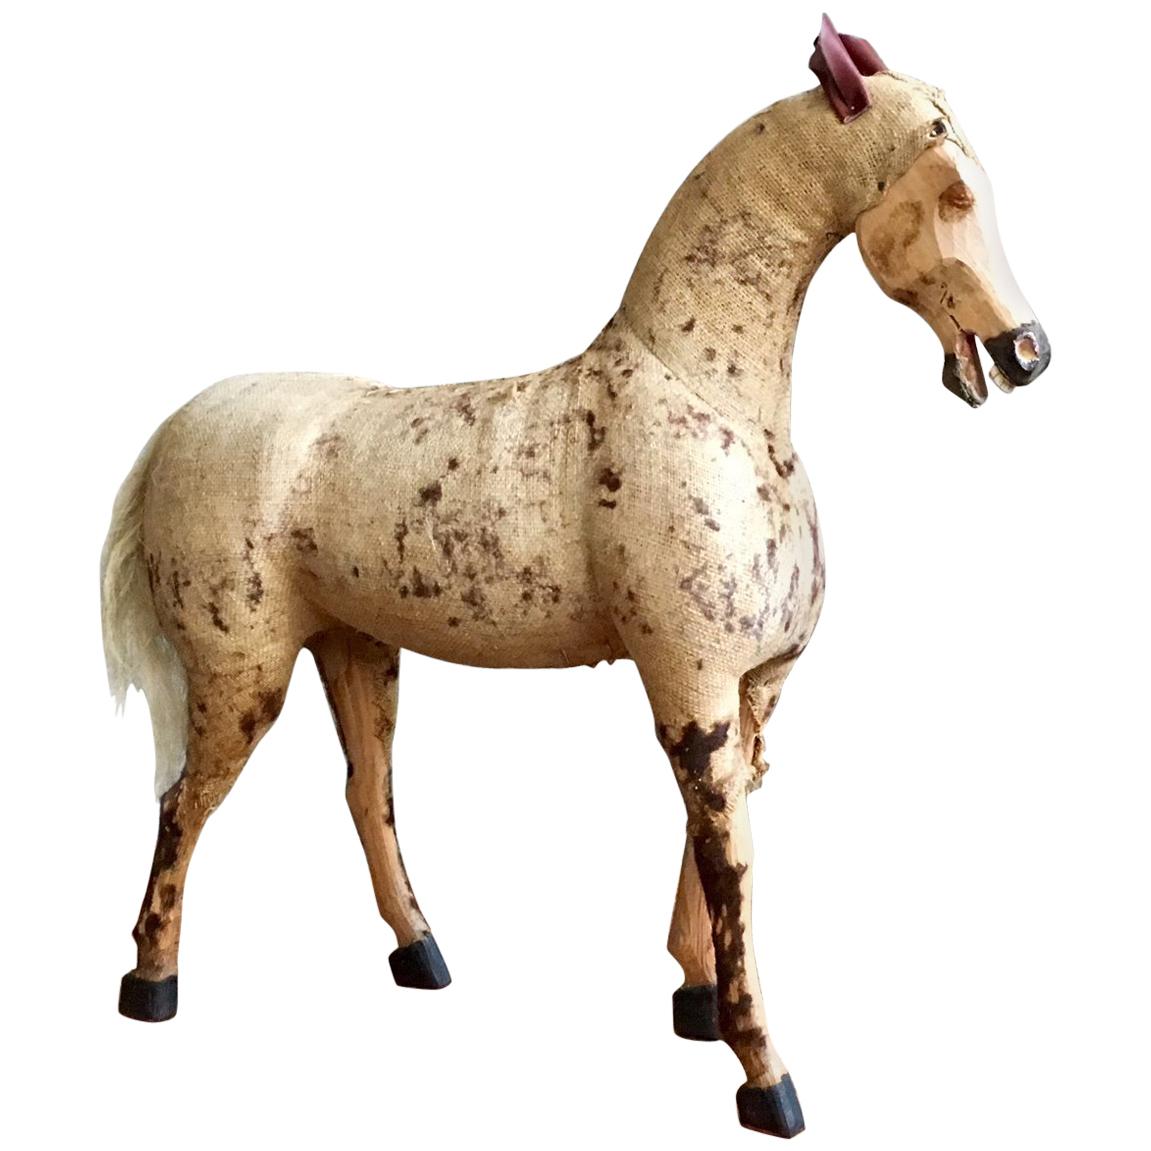 Decorative Vintage Horse in Worn Burlap, Leather and Wood